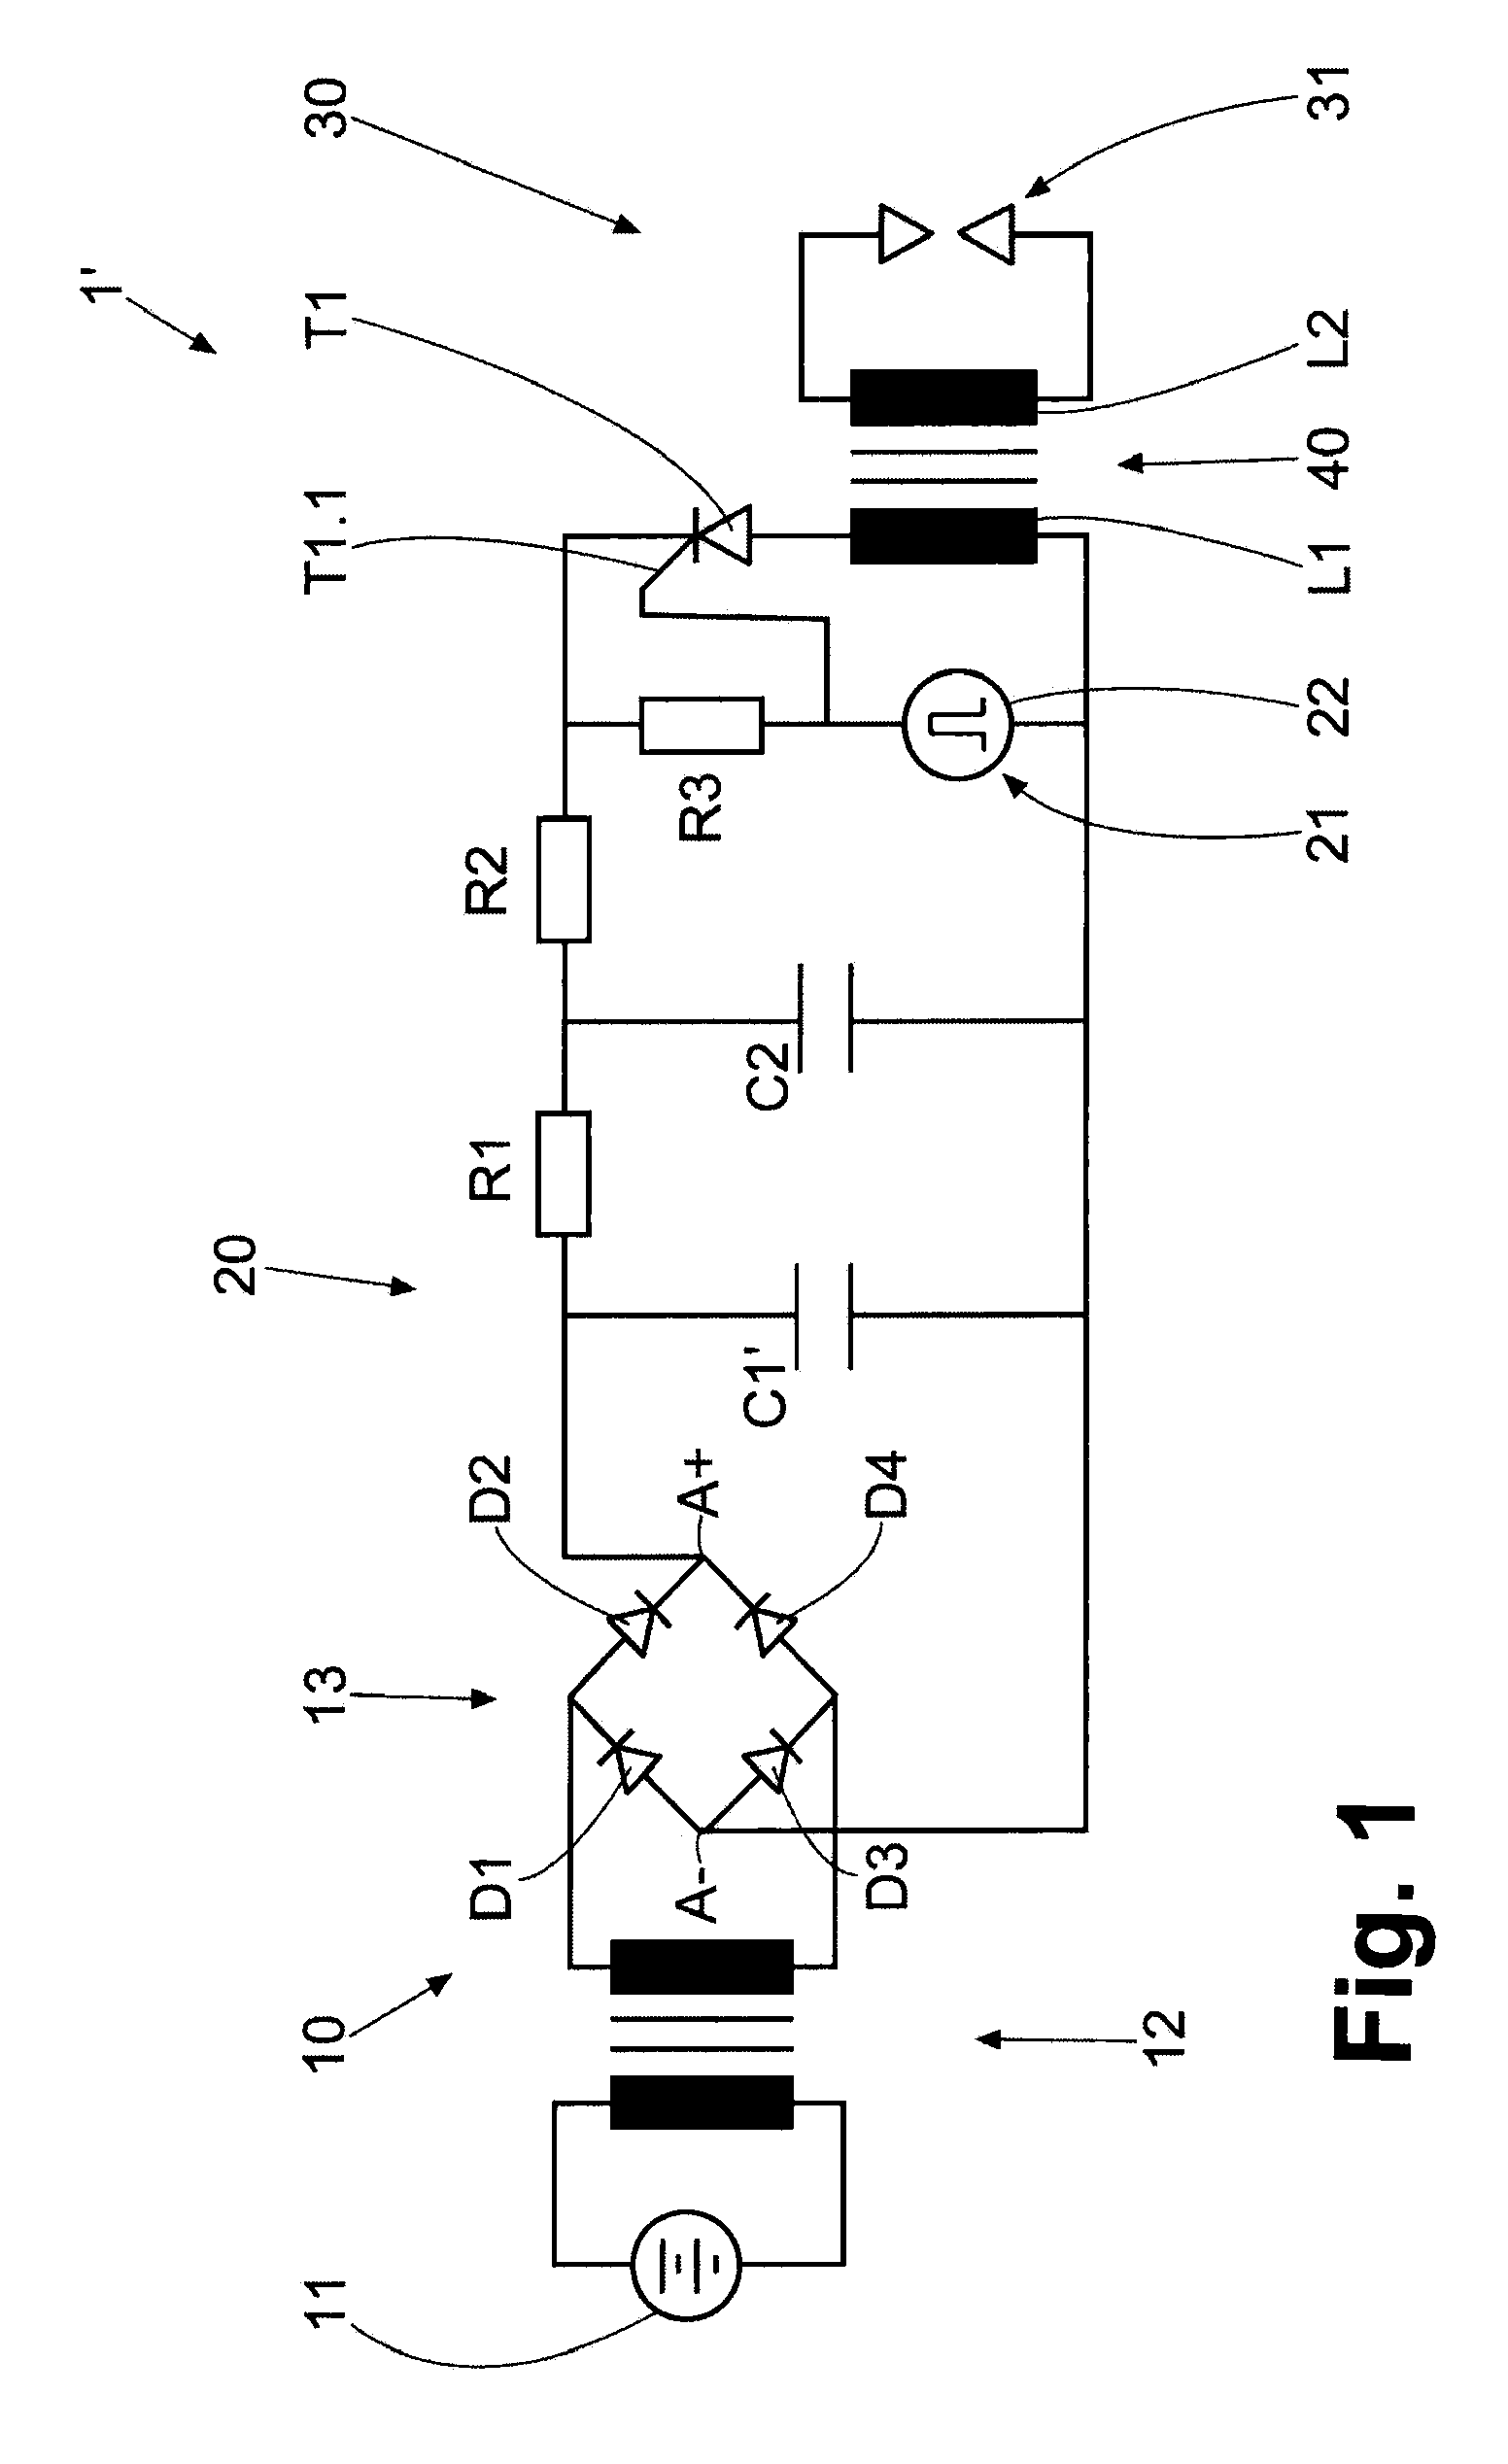 Capacitive Ignition System